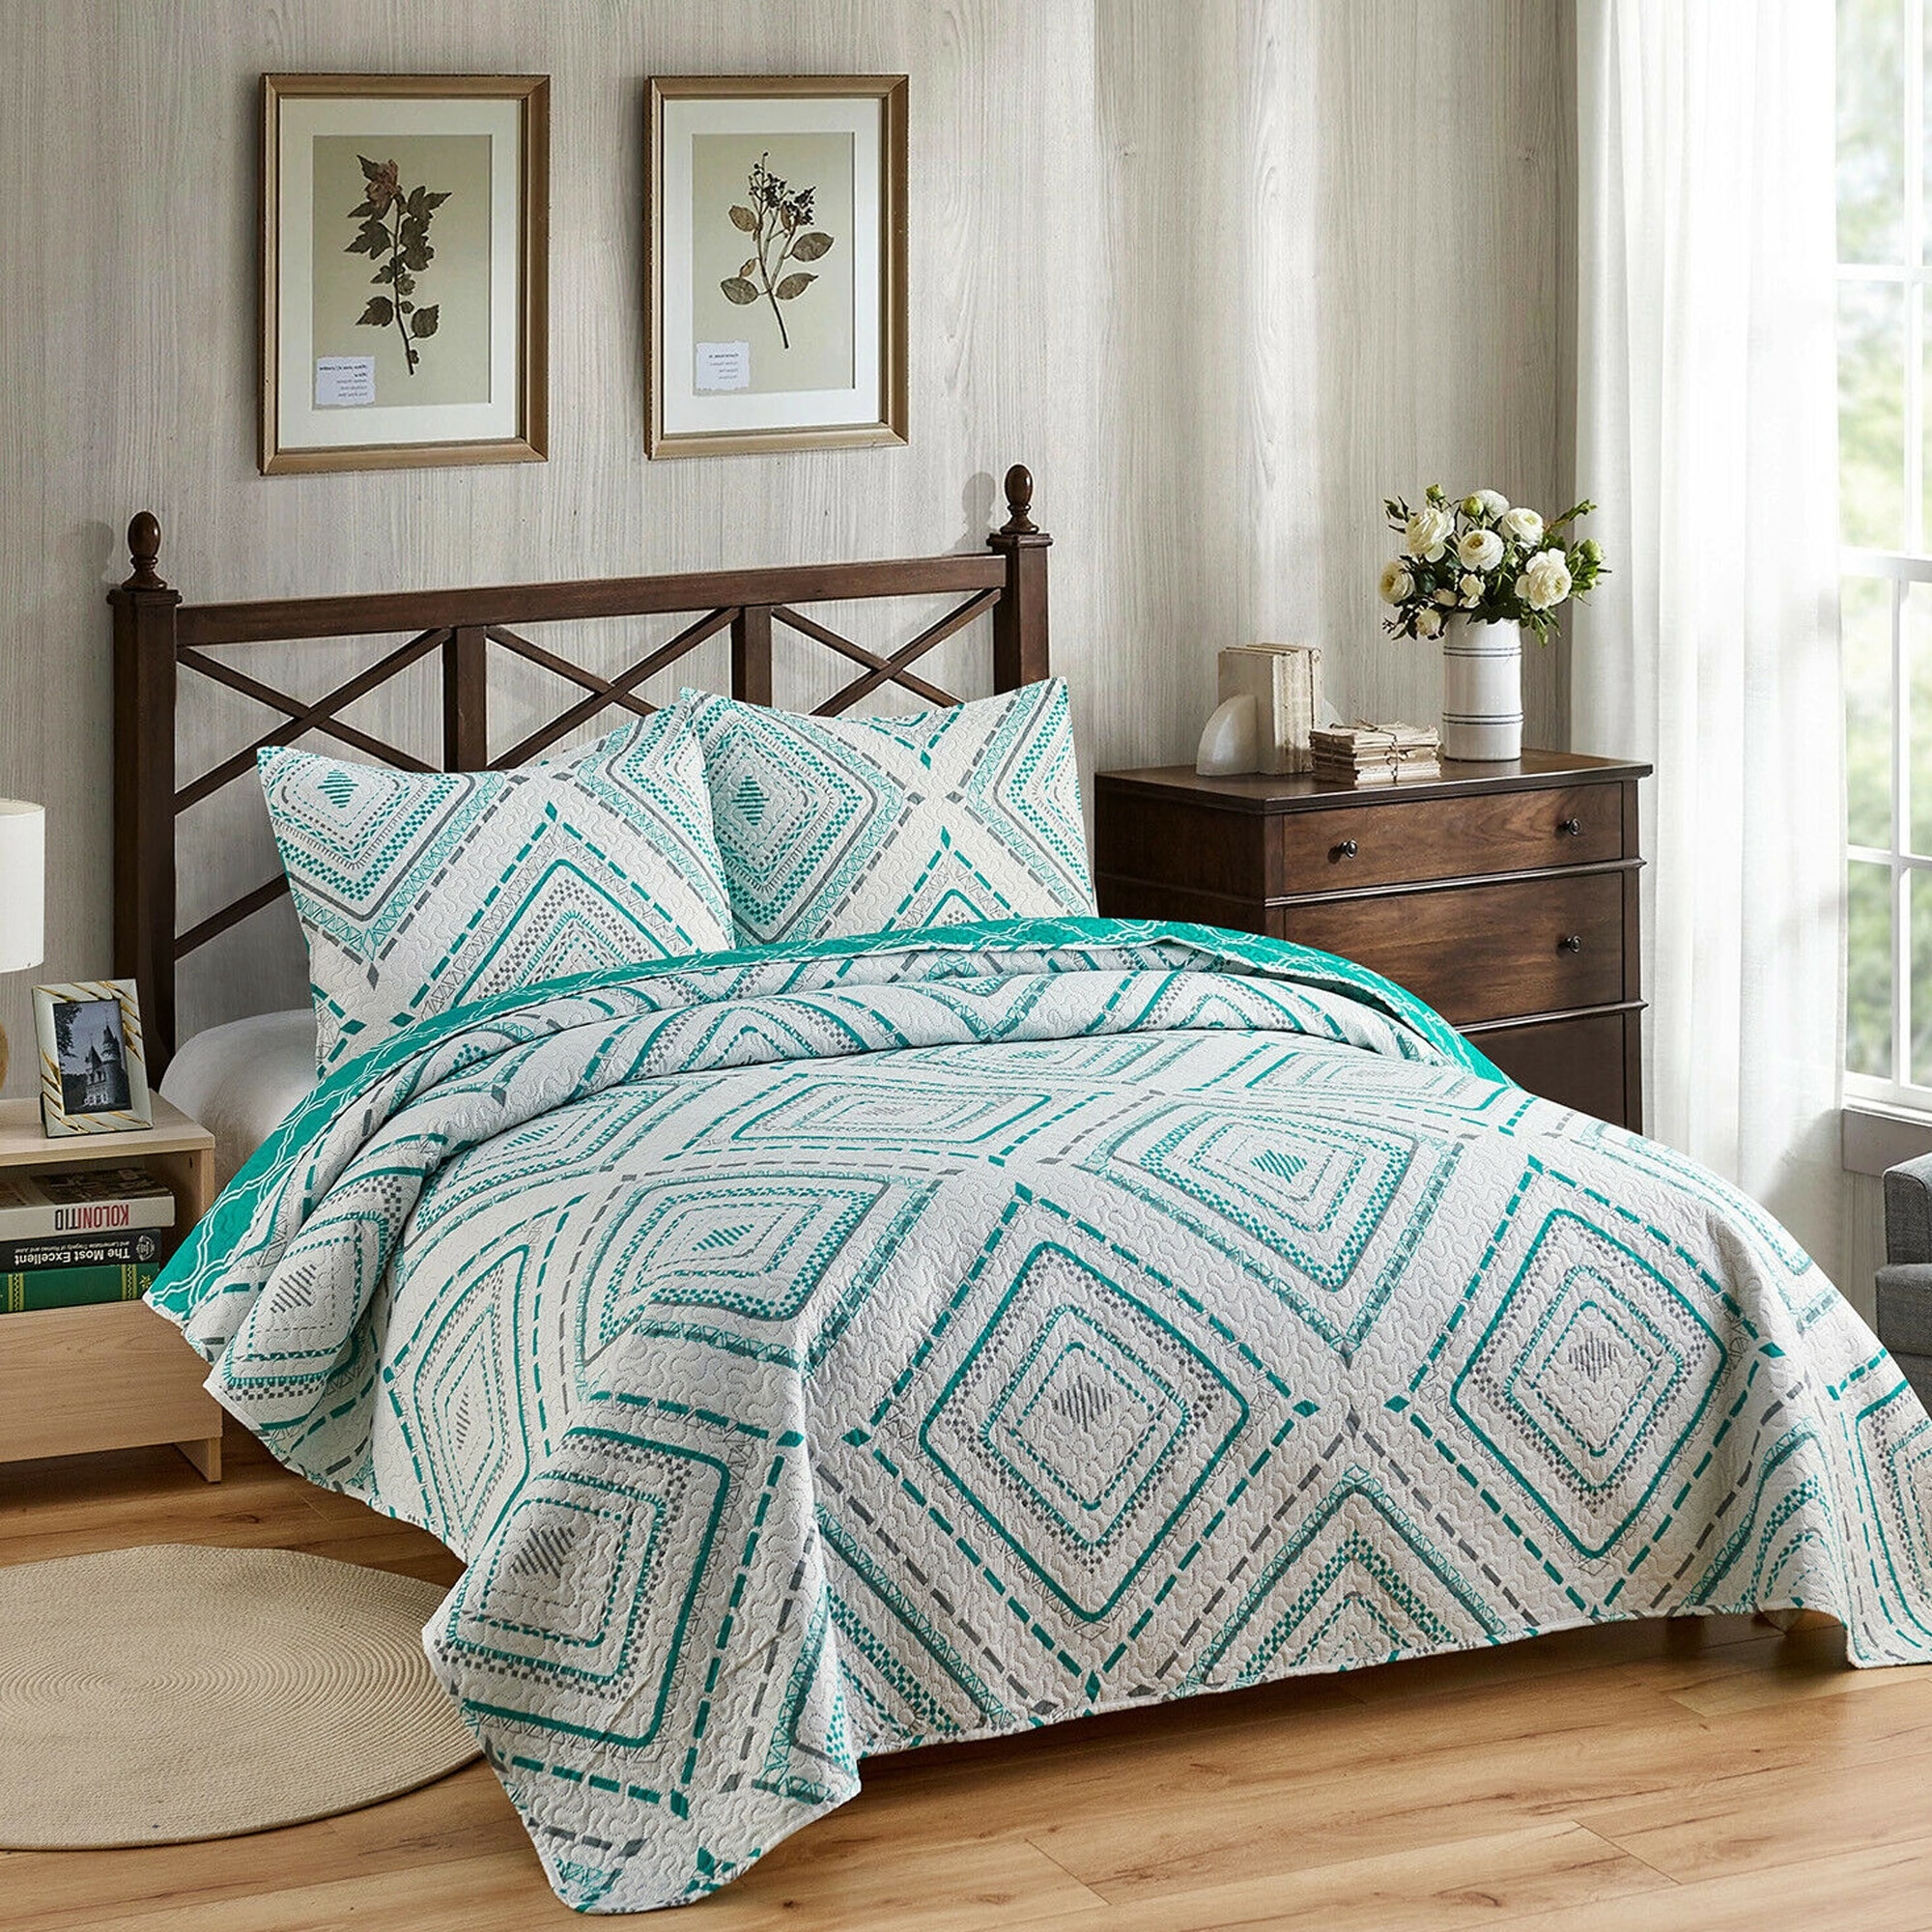 https://ak1.ostkcdn.com/images/products/is/images/direct/9469b54e5d029c178e7bf0fa813e48e9c1cca4fc/3-Piece-Microfiber-King-Quilt-Plaid-Patchwork-Bedding-Set-Turquoise.jpg